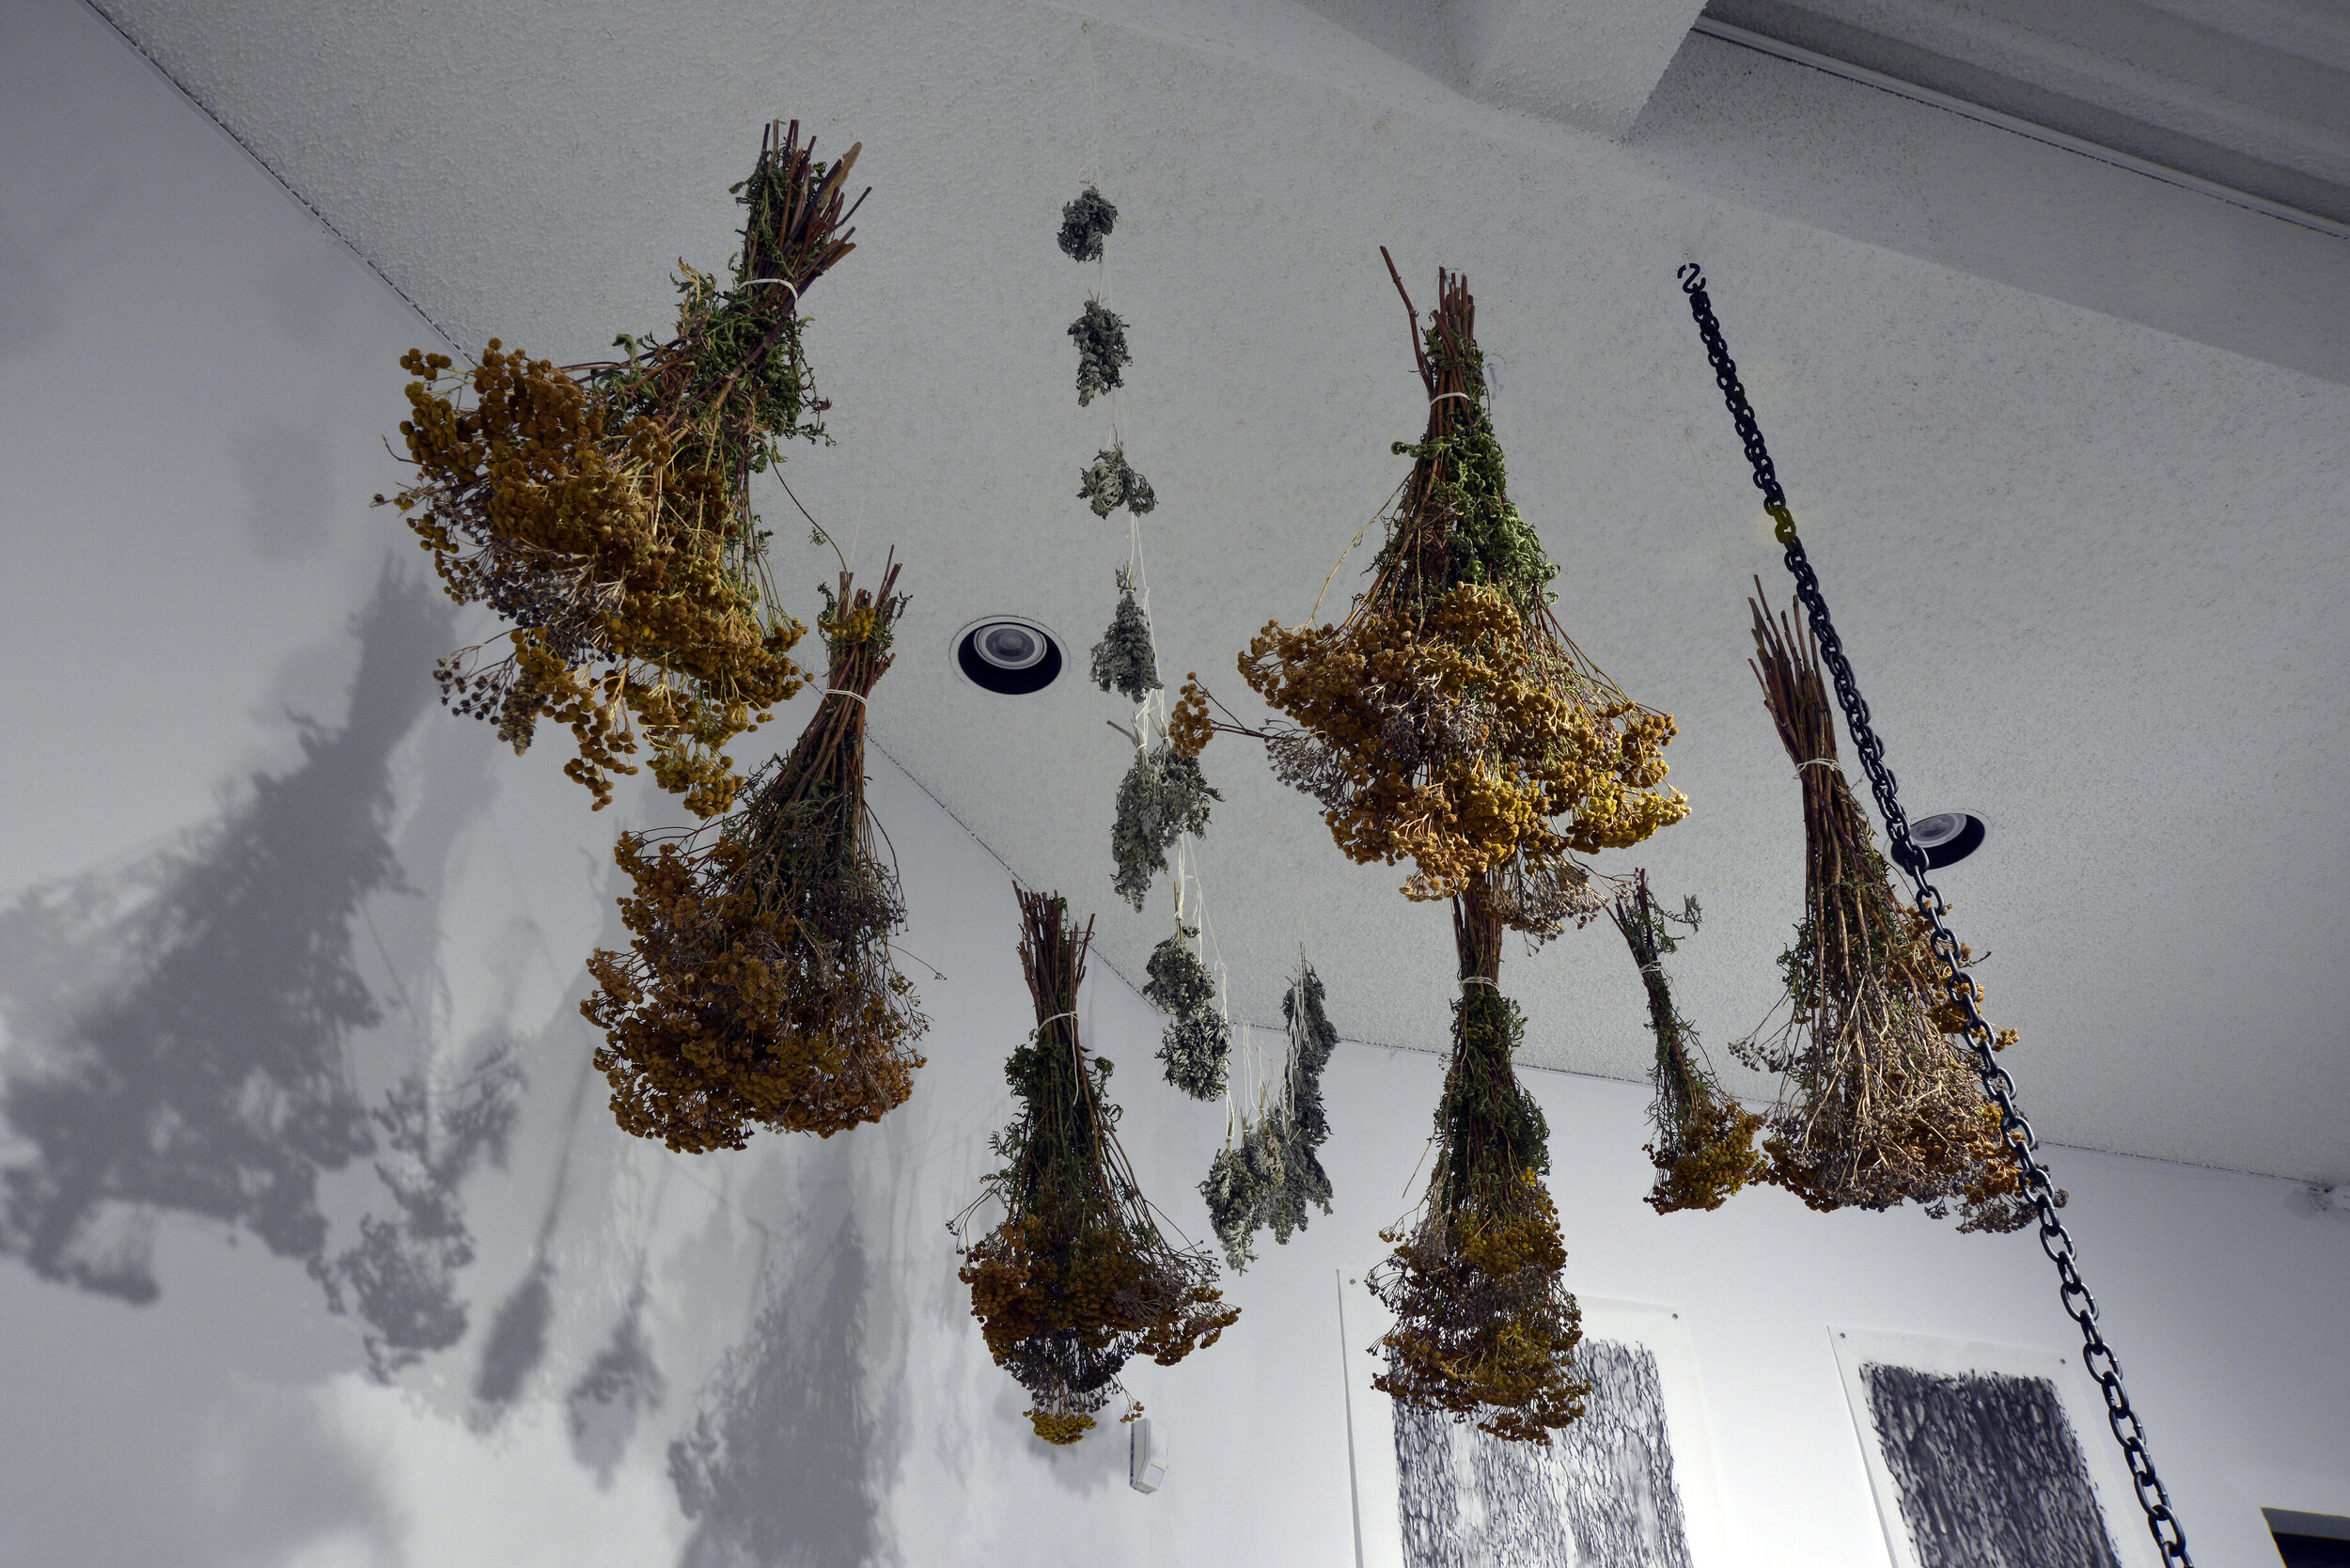  Alana Bartol,  Rotten Pot (detail) , 2020, used 19th c. copper and forged iron cauldron from France, coal, rocks, dried plants: wormwood, tansy, and sweet clover. 